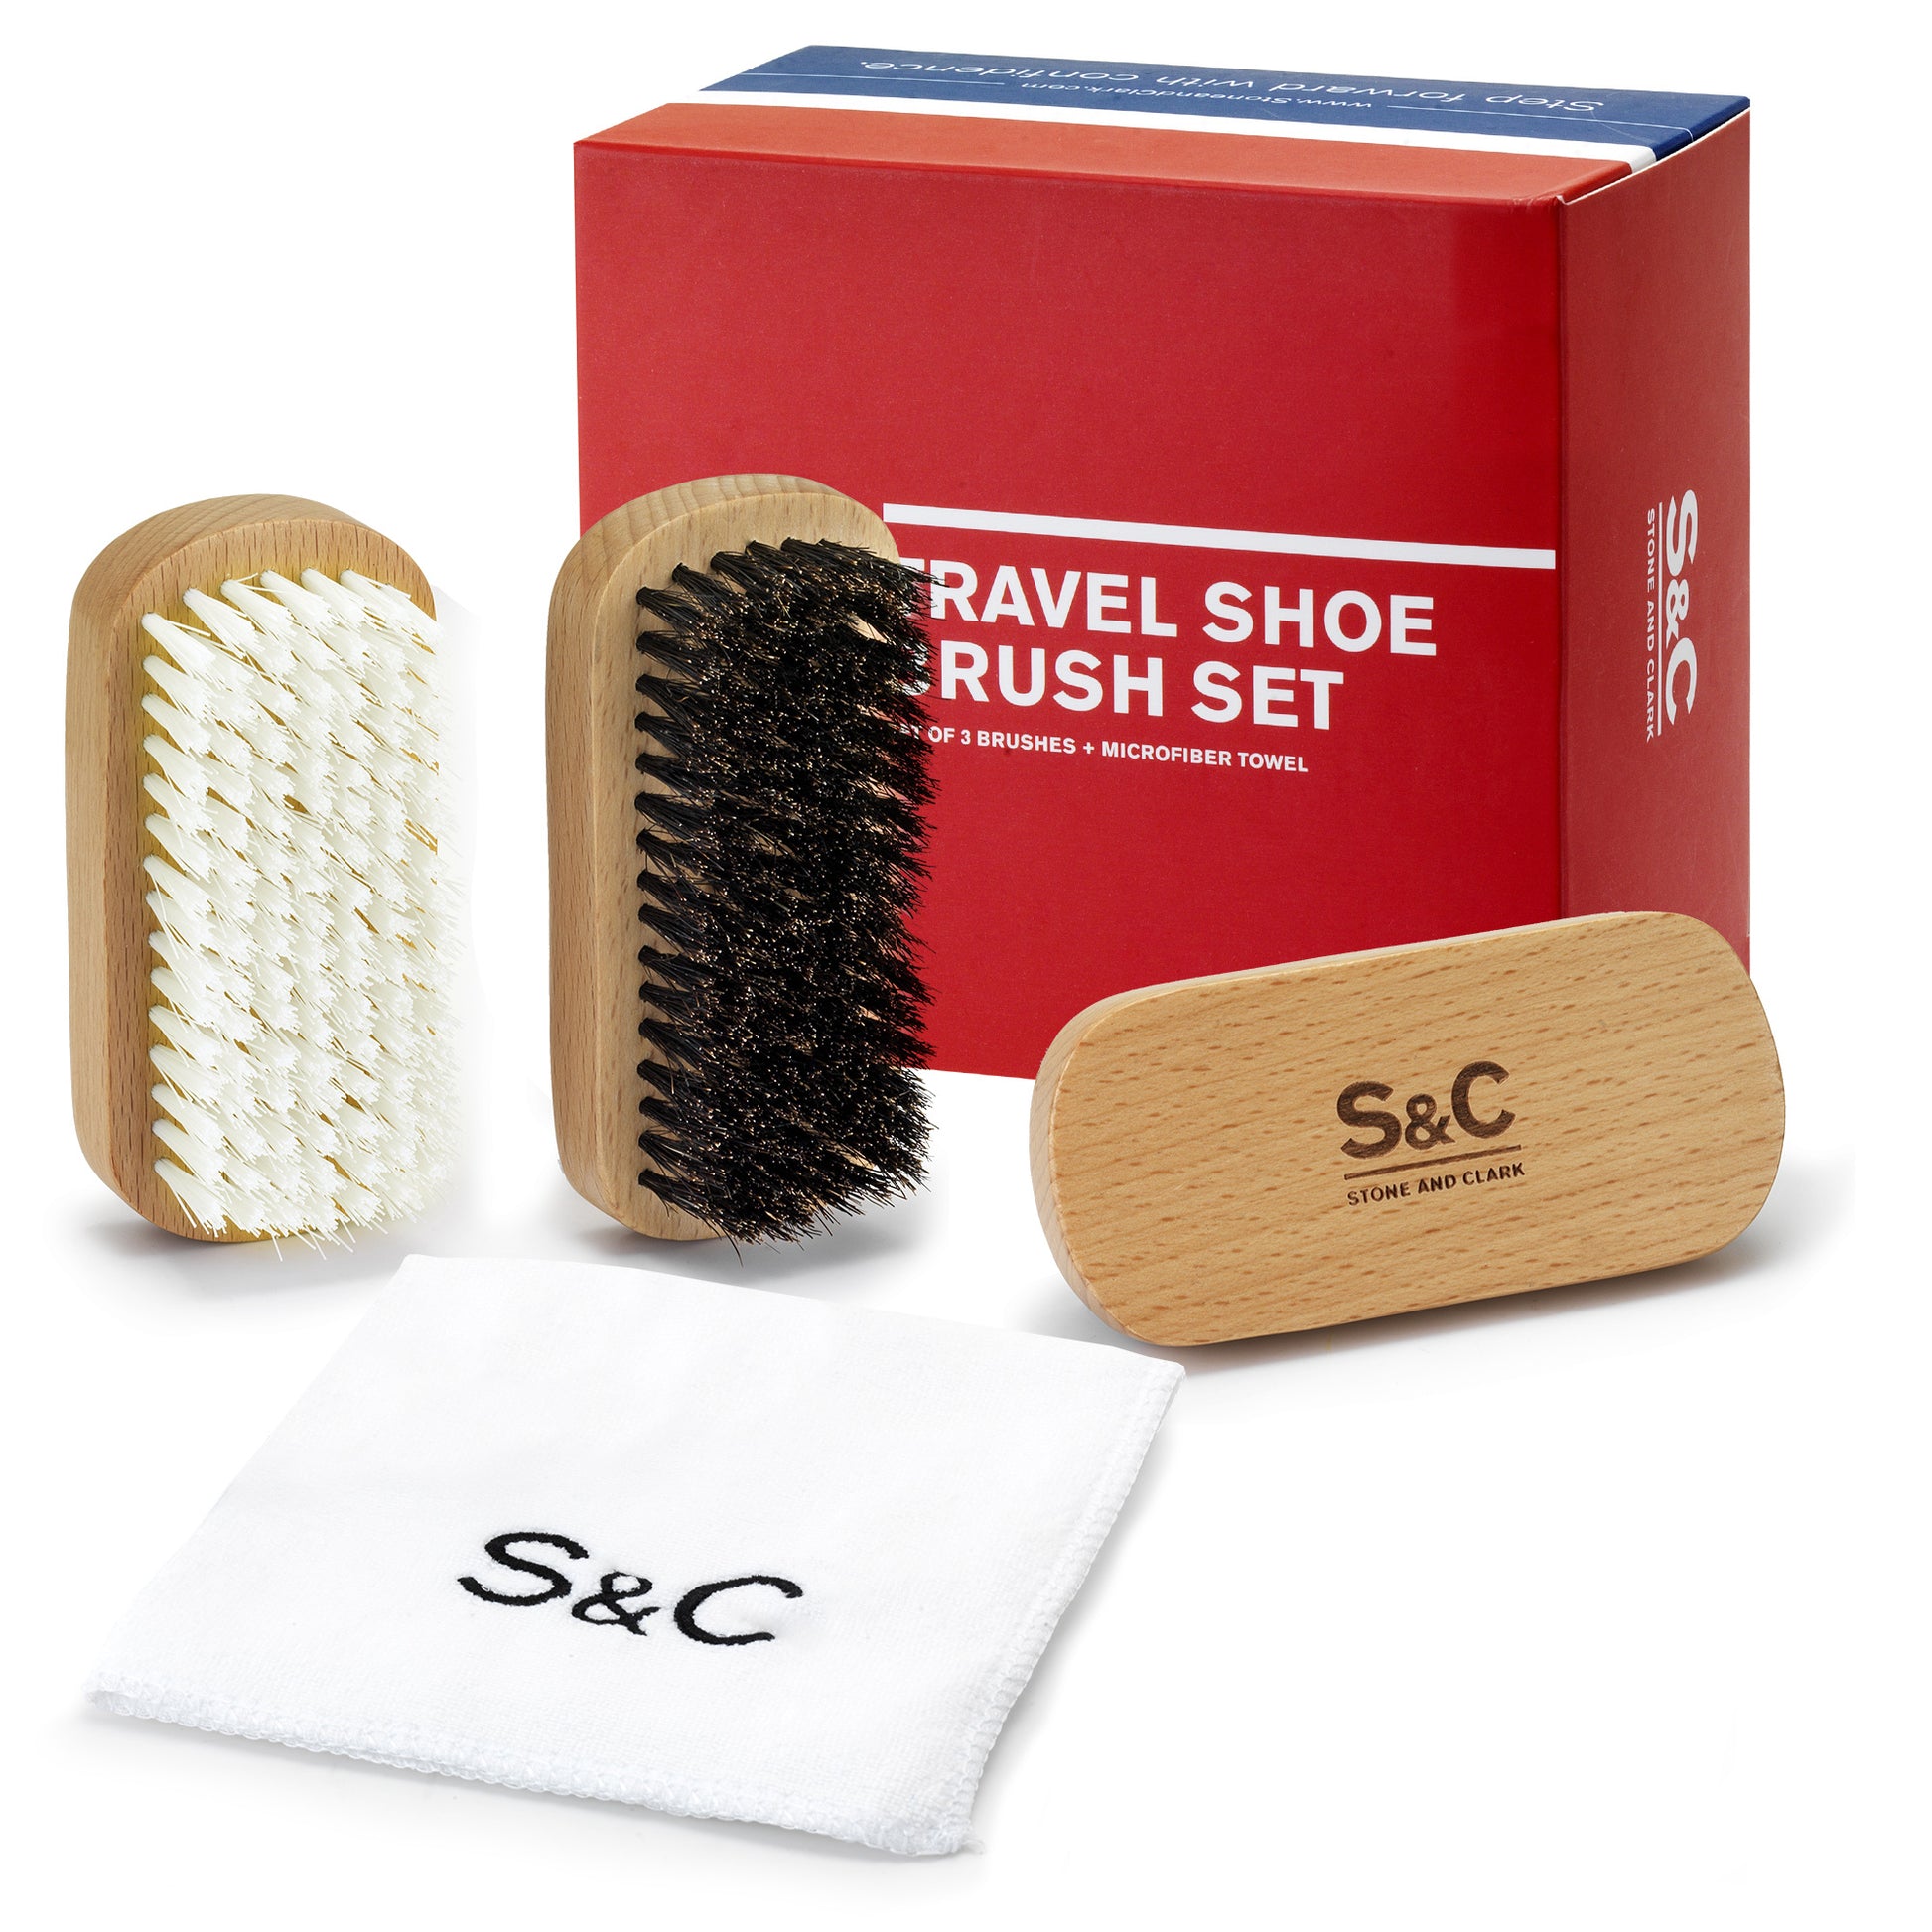  3 Pieces Shoe Brush, Boot Brush, Horse Hair Brush for Leather,  Horsehair Brush, Shoe Polish Brush, Horsehair Shoe Brush, Horse Hair Brush,  Gentle and Effective Shoe Cleaning Tool for Leather 